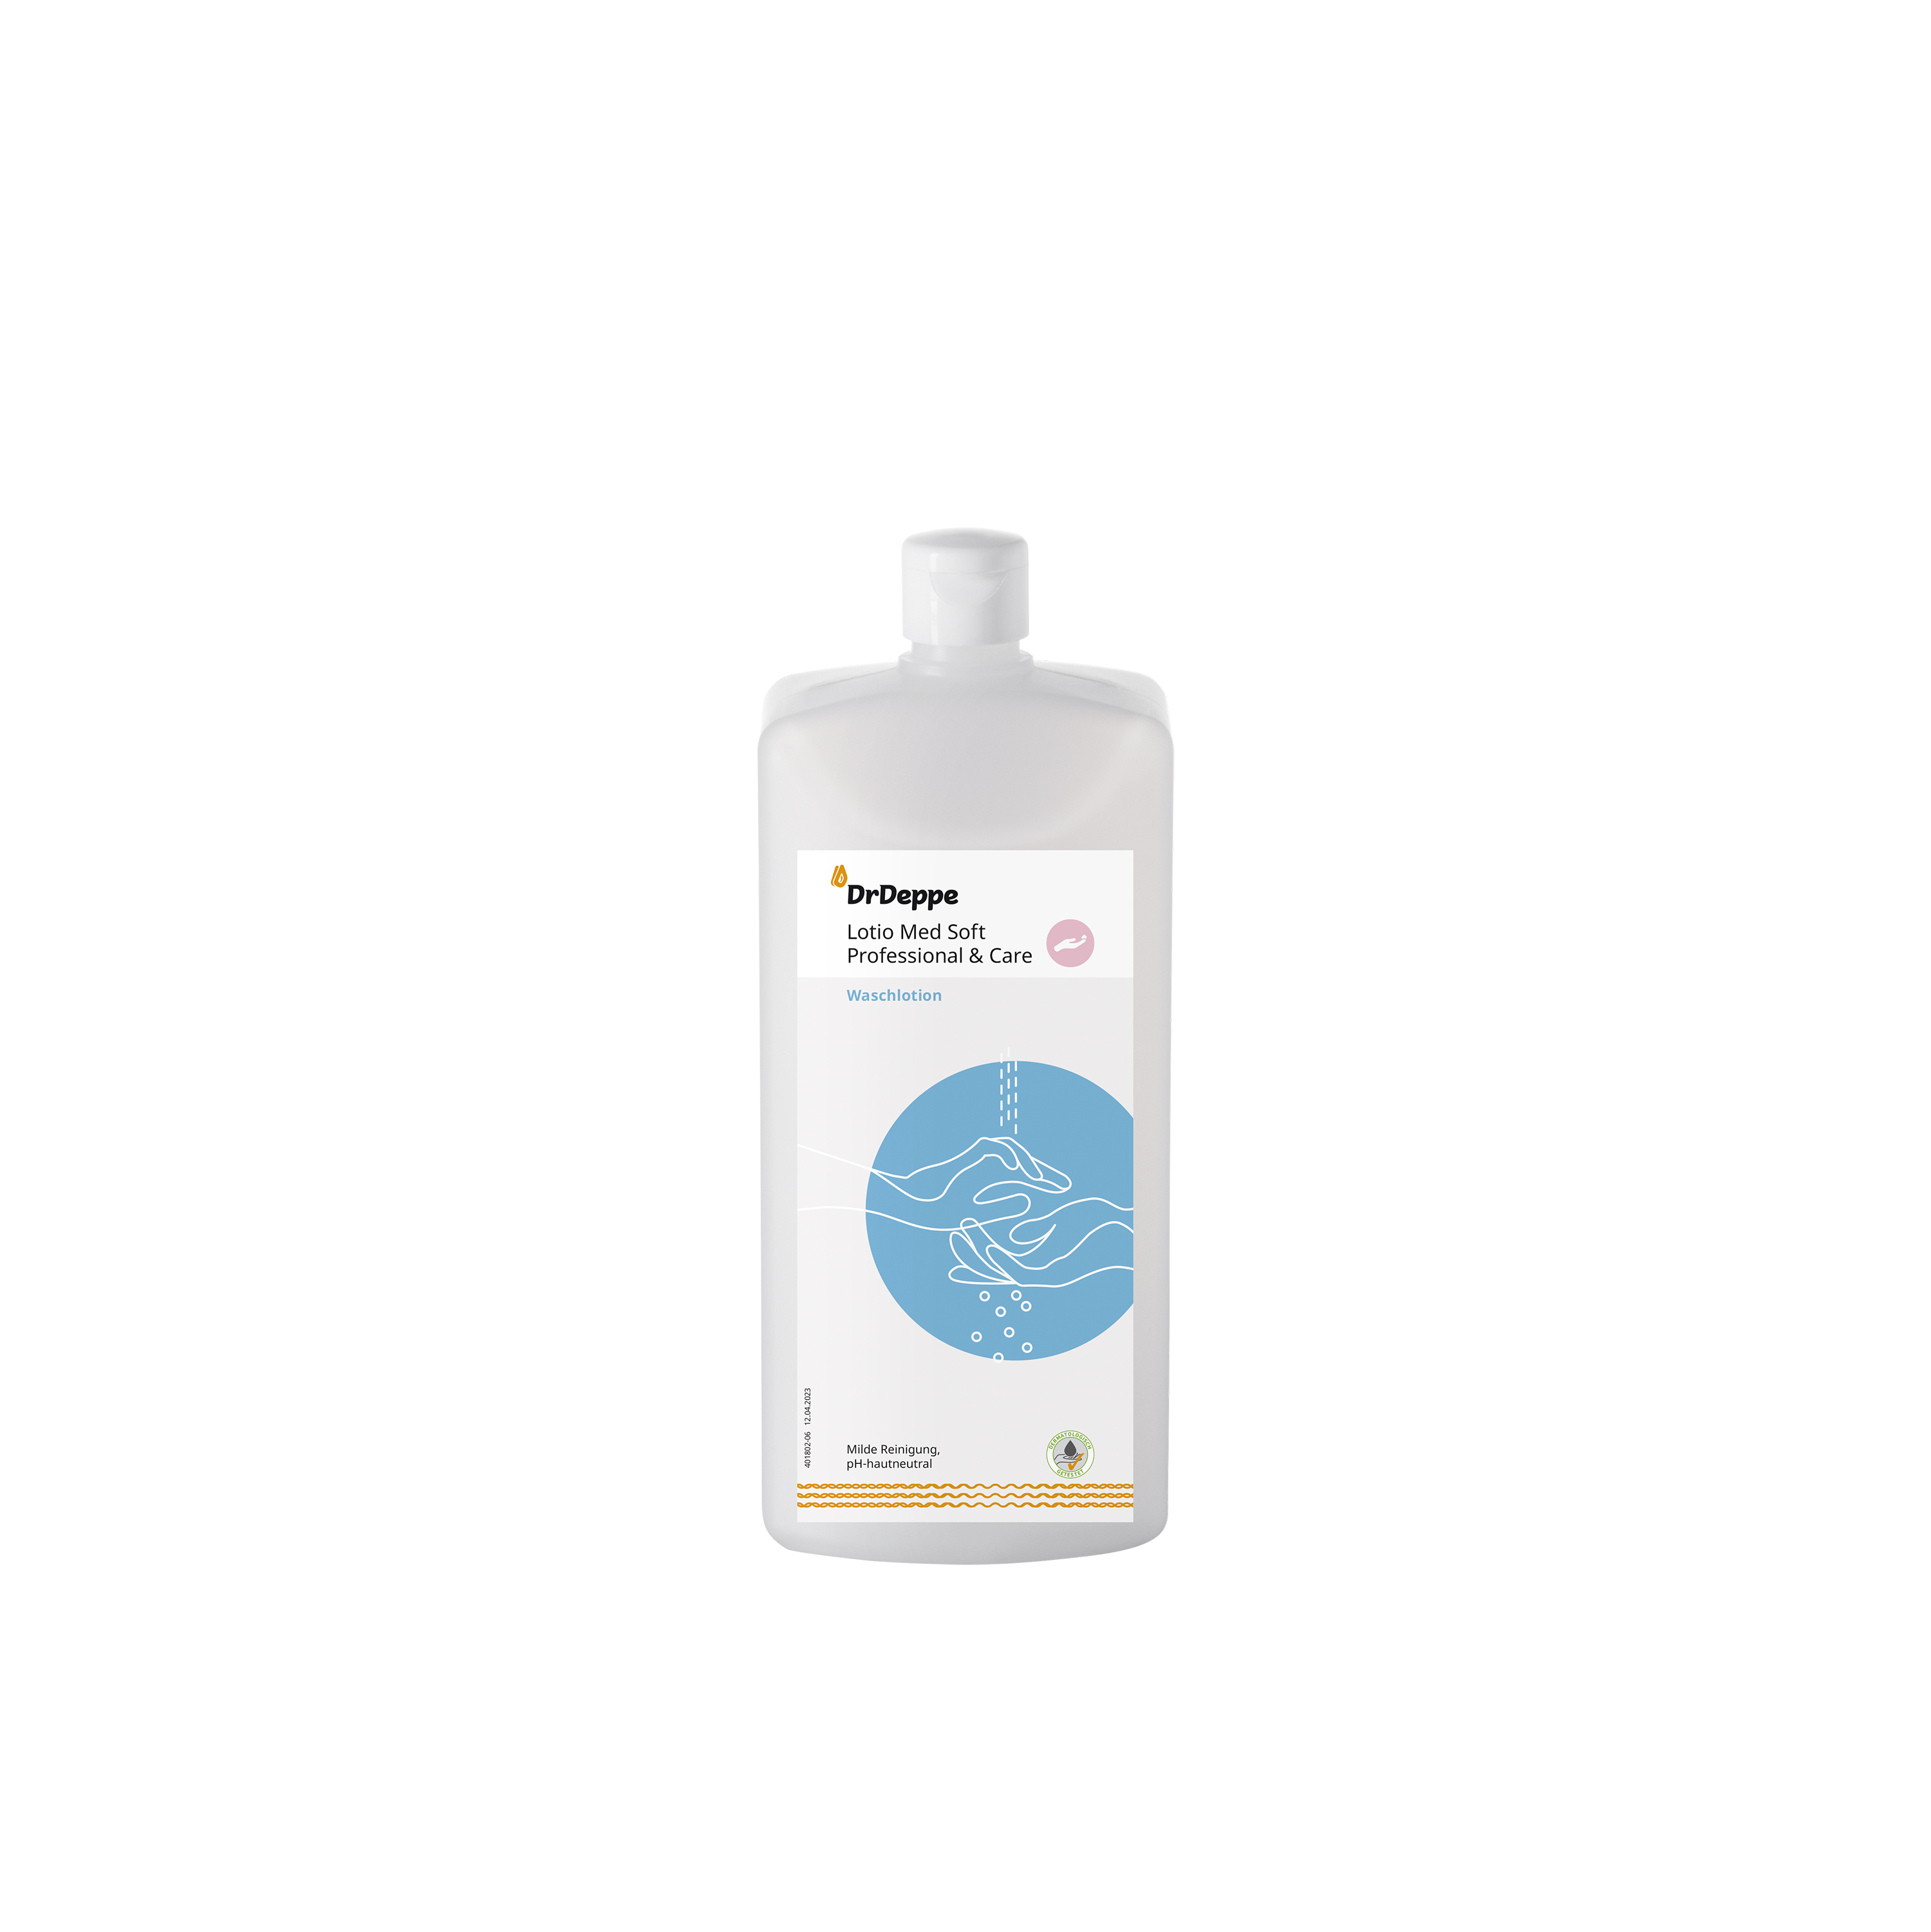 DrDeppe Lotio Med Soft Professional & Care Waschlotion 1 L